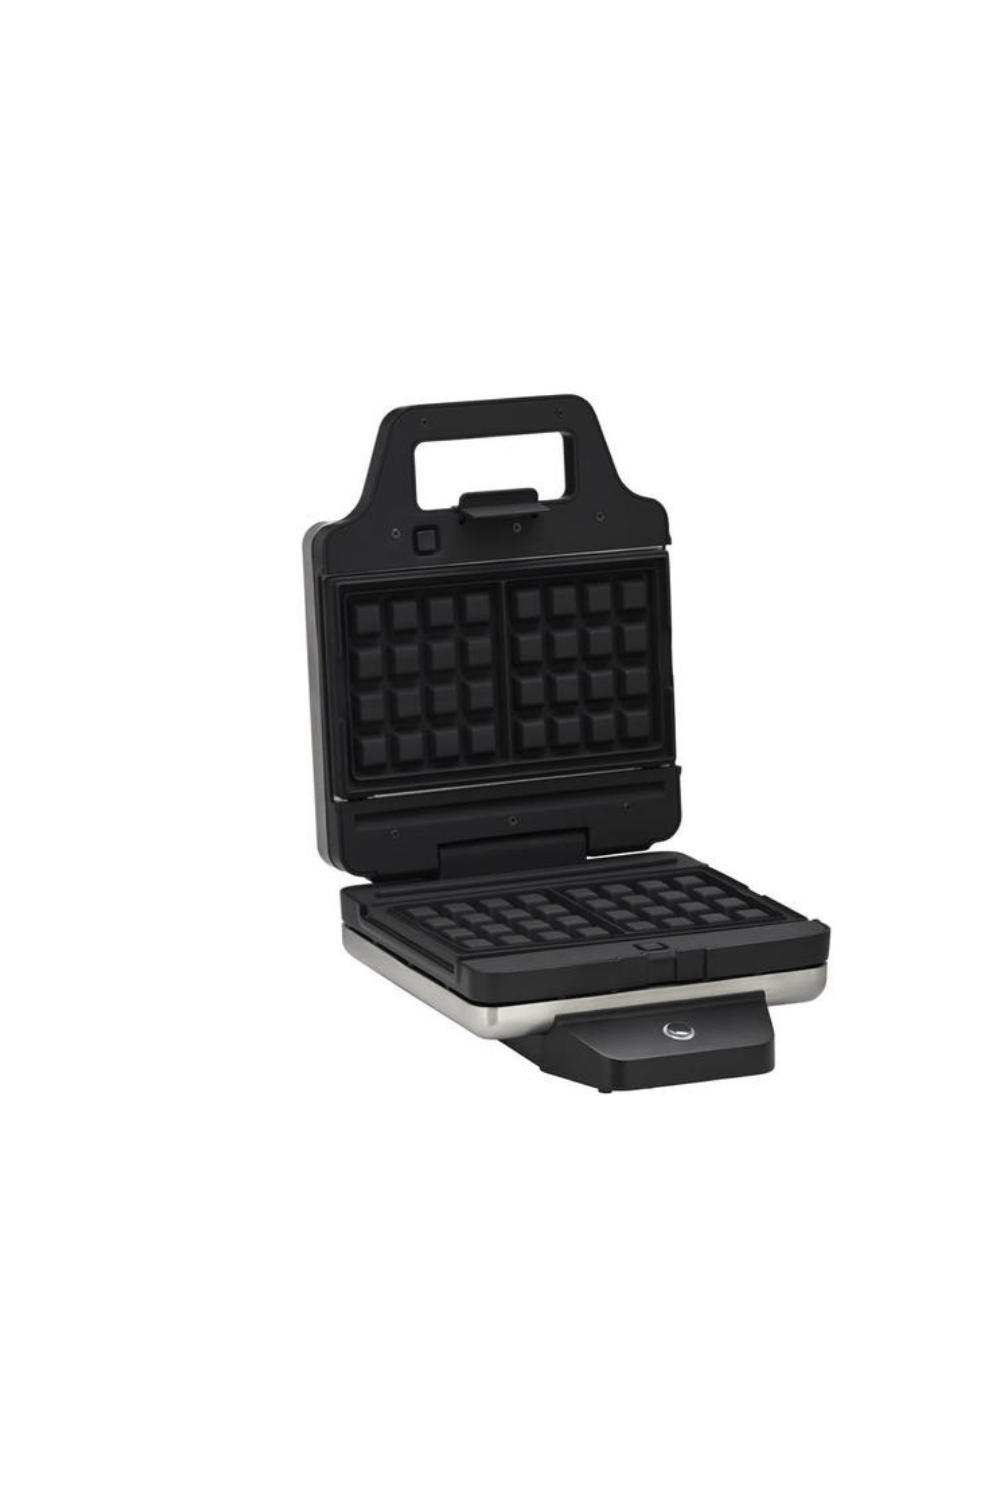 Wmf Lono Snack Master Pro Waffle ve Tost Makinesi 800W (Teşhir & Outlet)